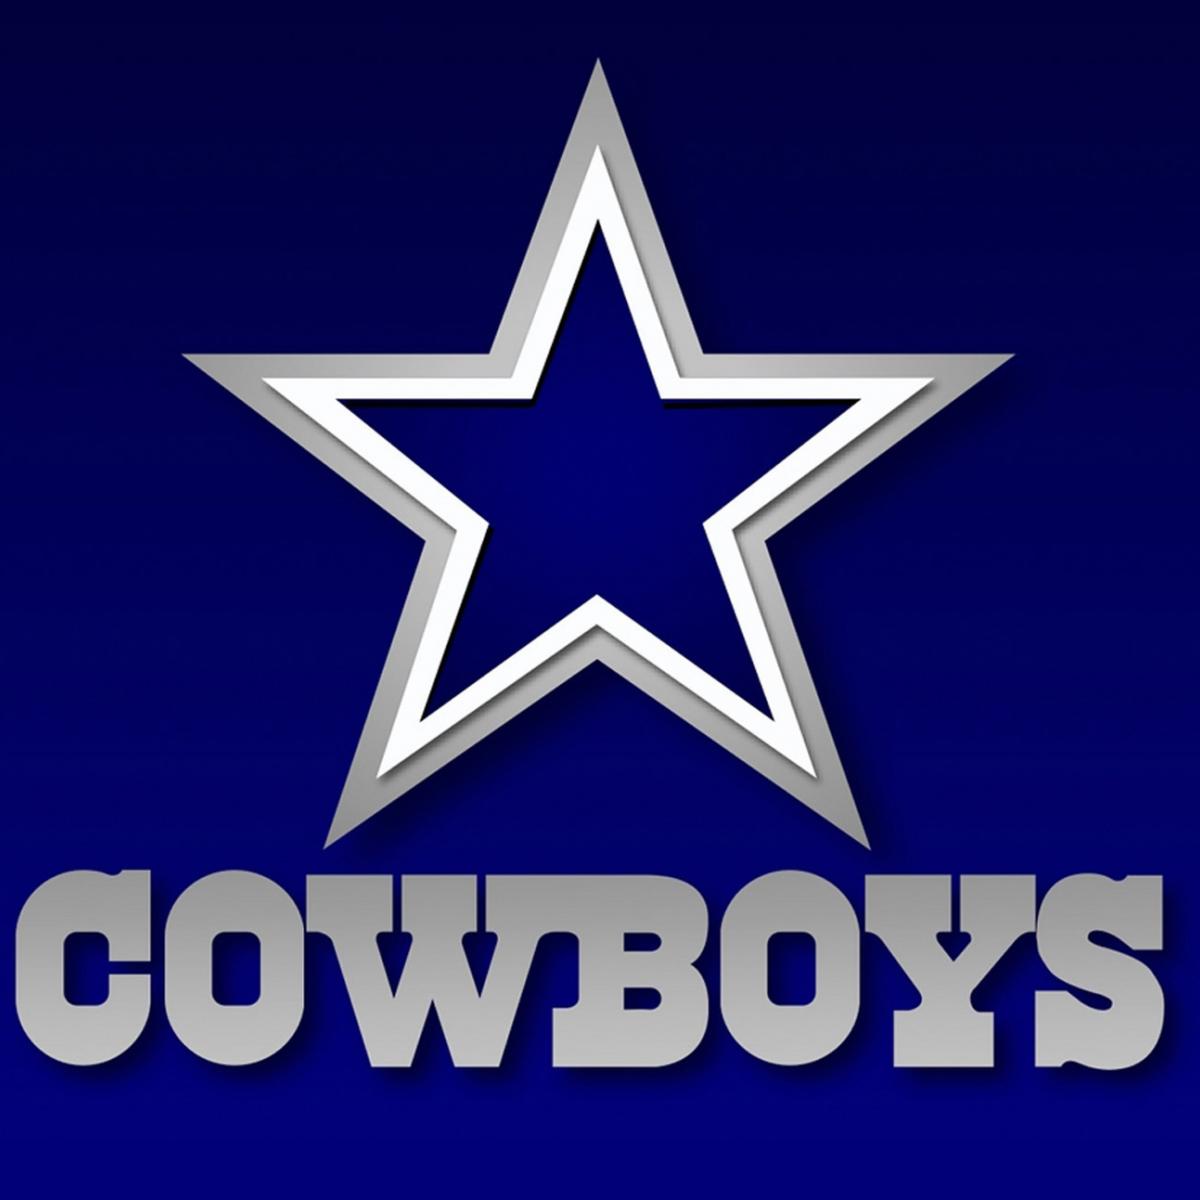 GOOD NEWS: Journalist Make Clear Report Over Dallas CowBoy And Houston ...